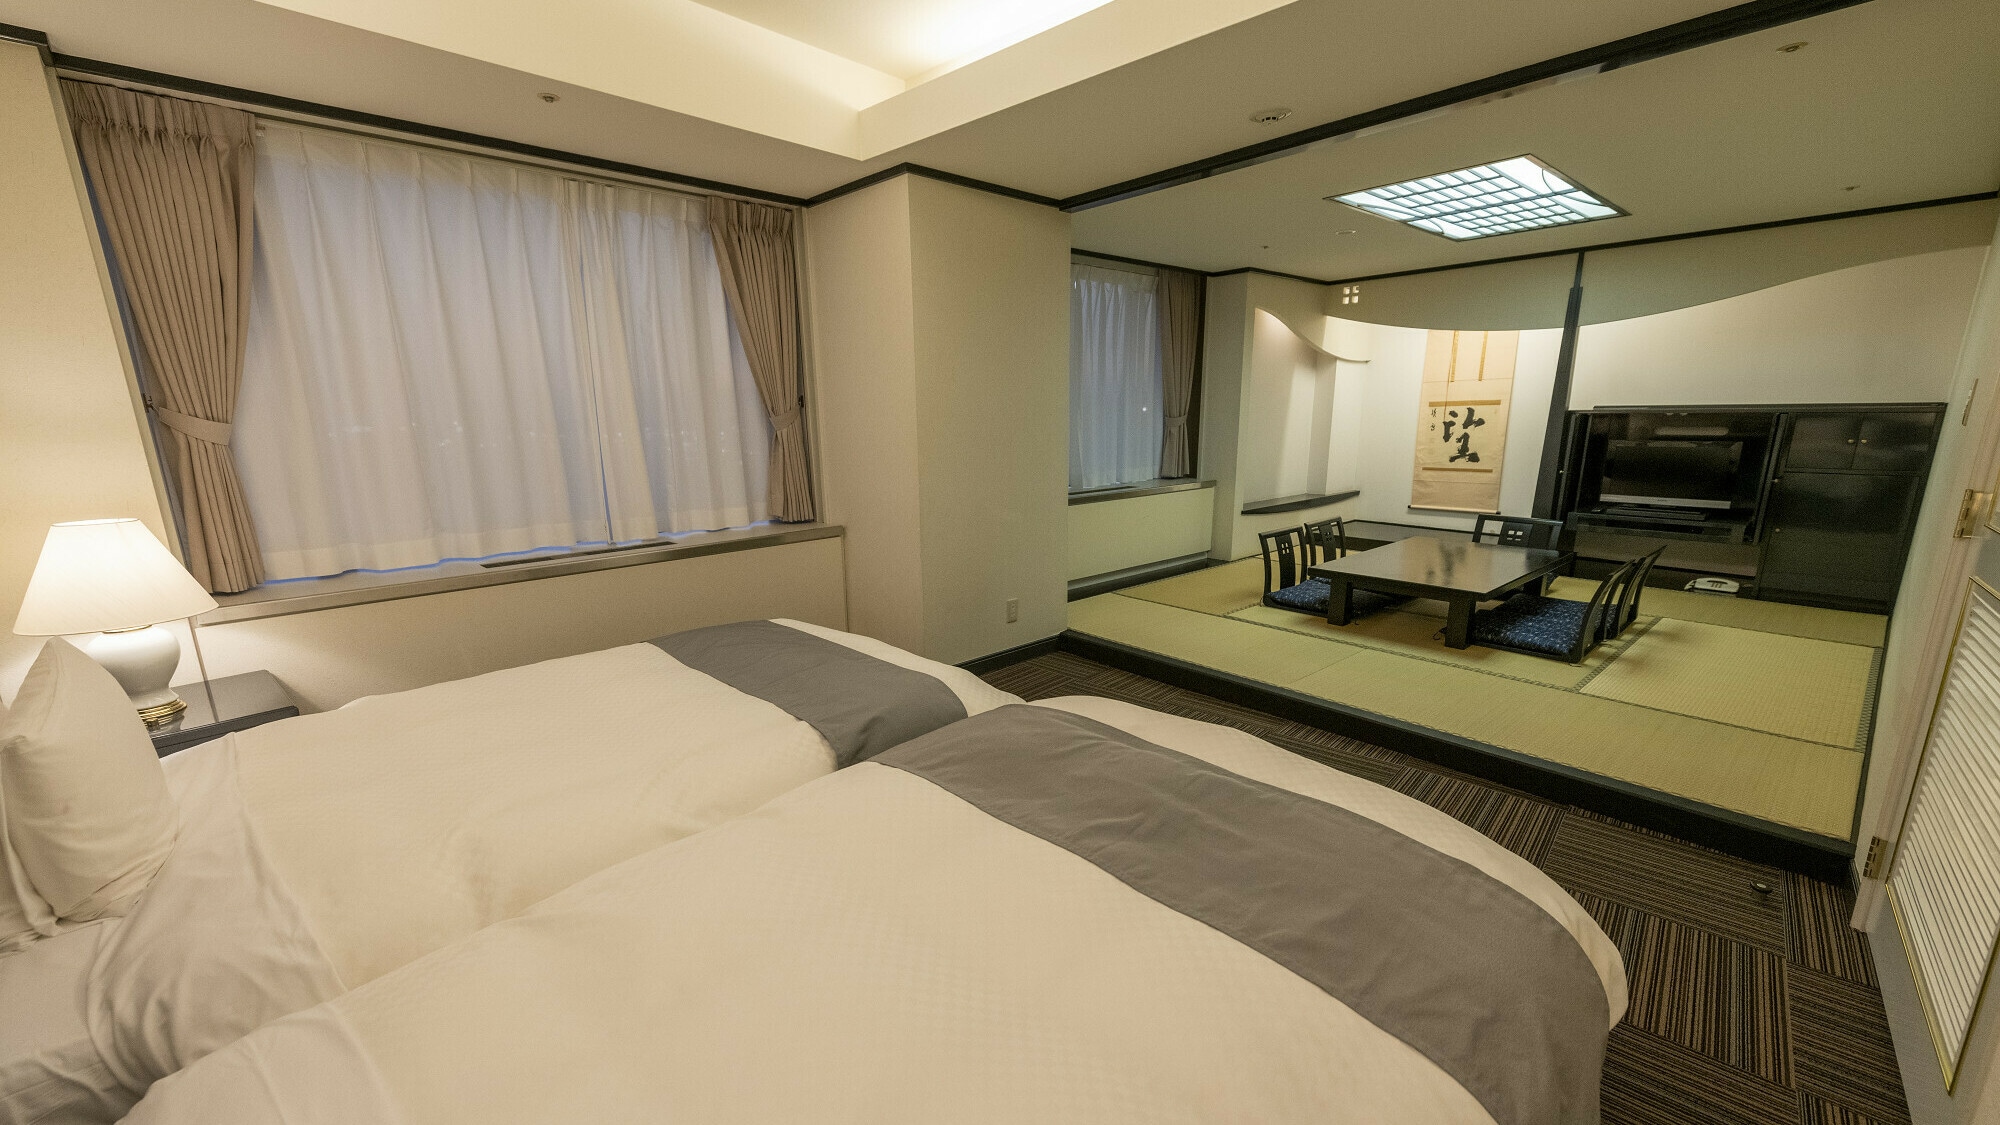 [Main building] Japanese and Western room B type ◆ 48.6 square meters ◆